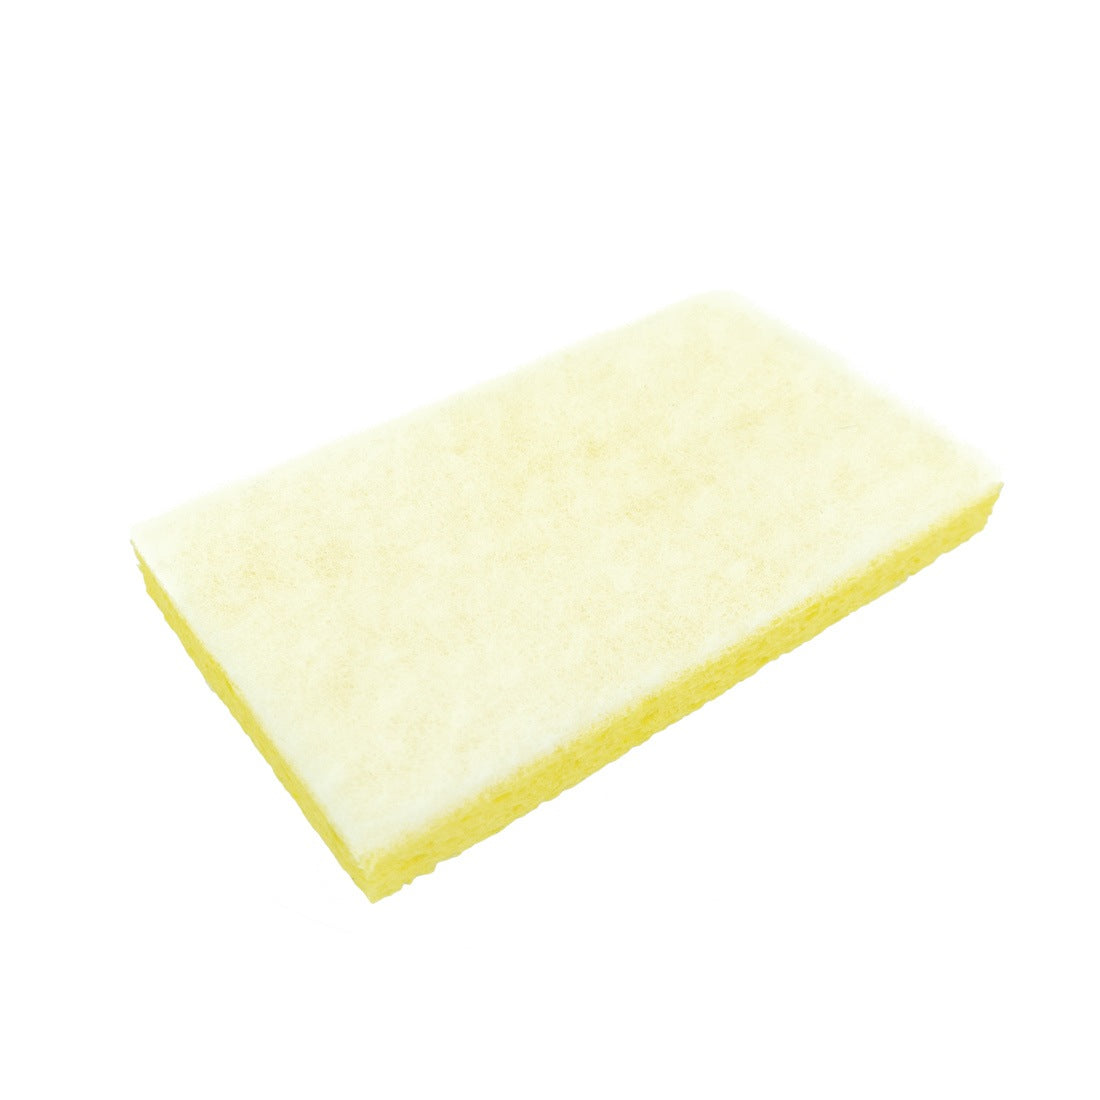 World Enterprises Sponge with Backing Pad - White - Main Product Front View